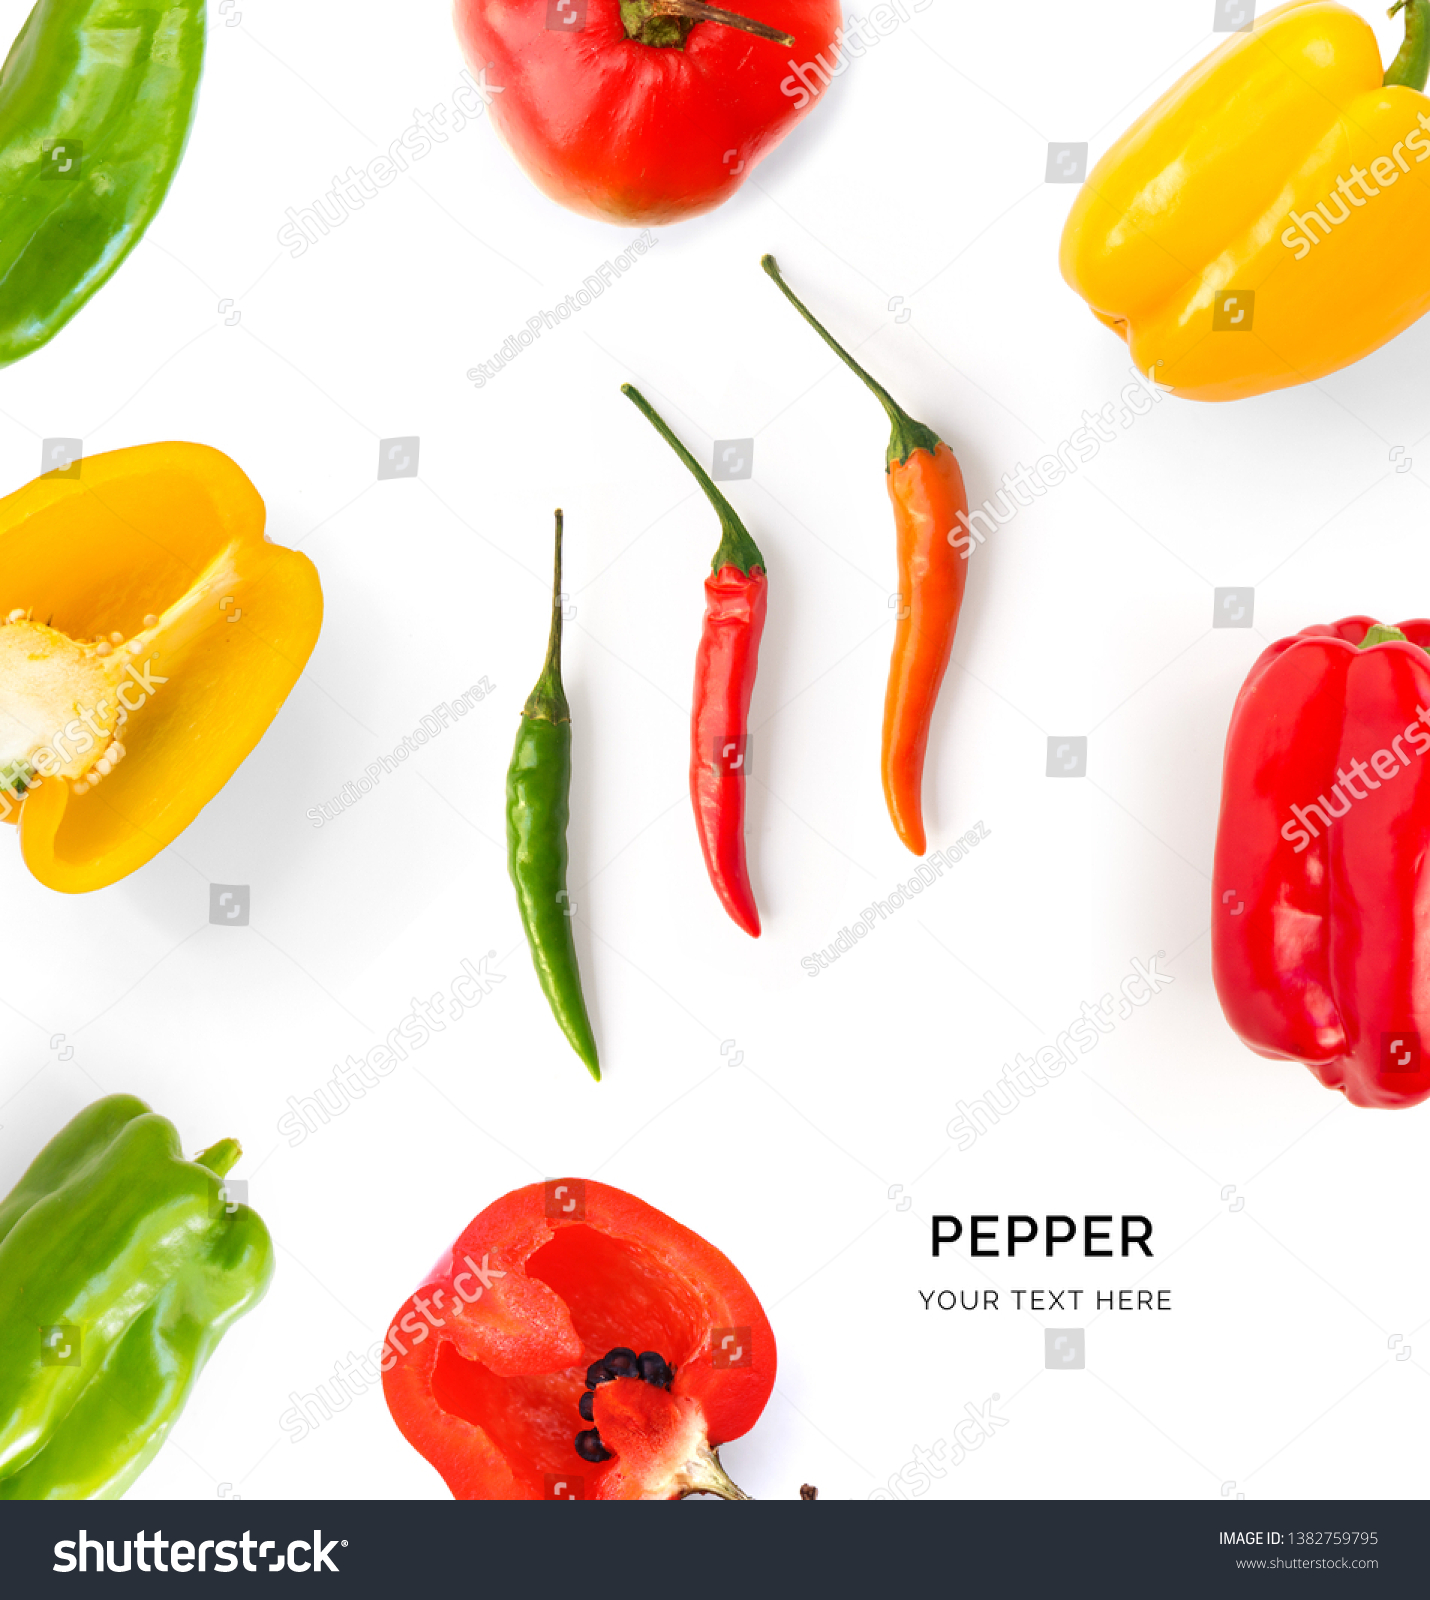 Creative layout made of green, red and yellow pepper. Flat lay. Food concept. Colorful pepper on white background. #1382759795